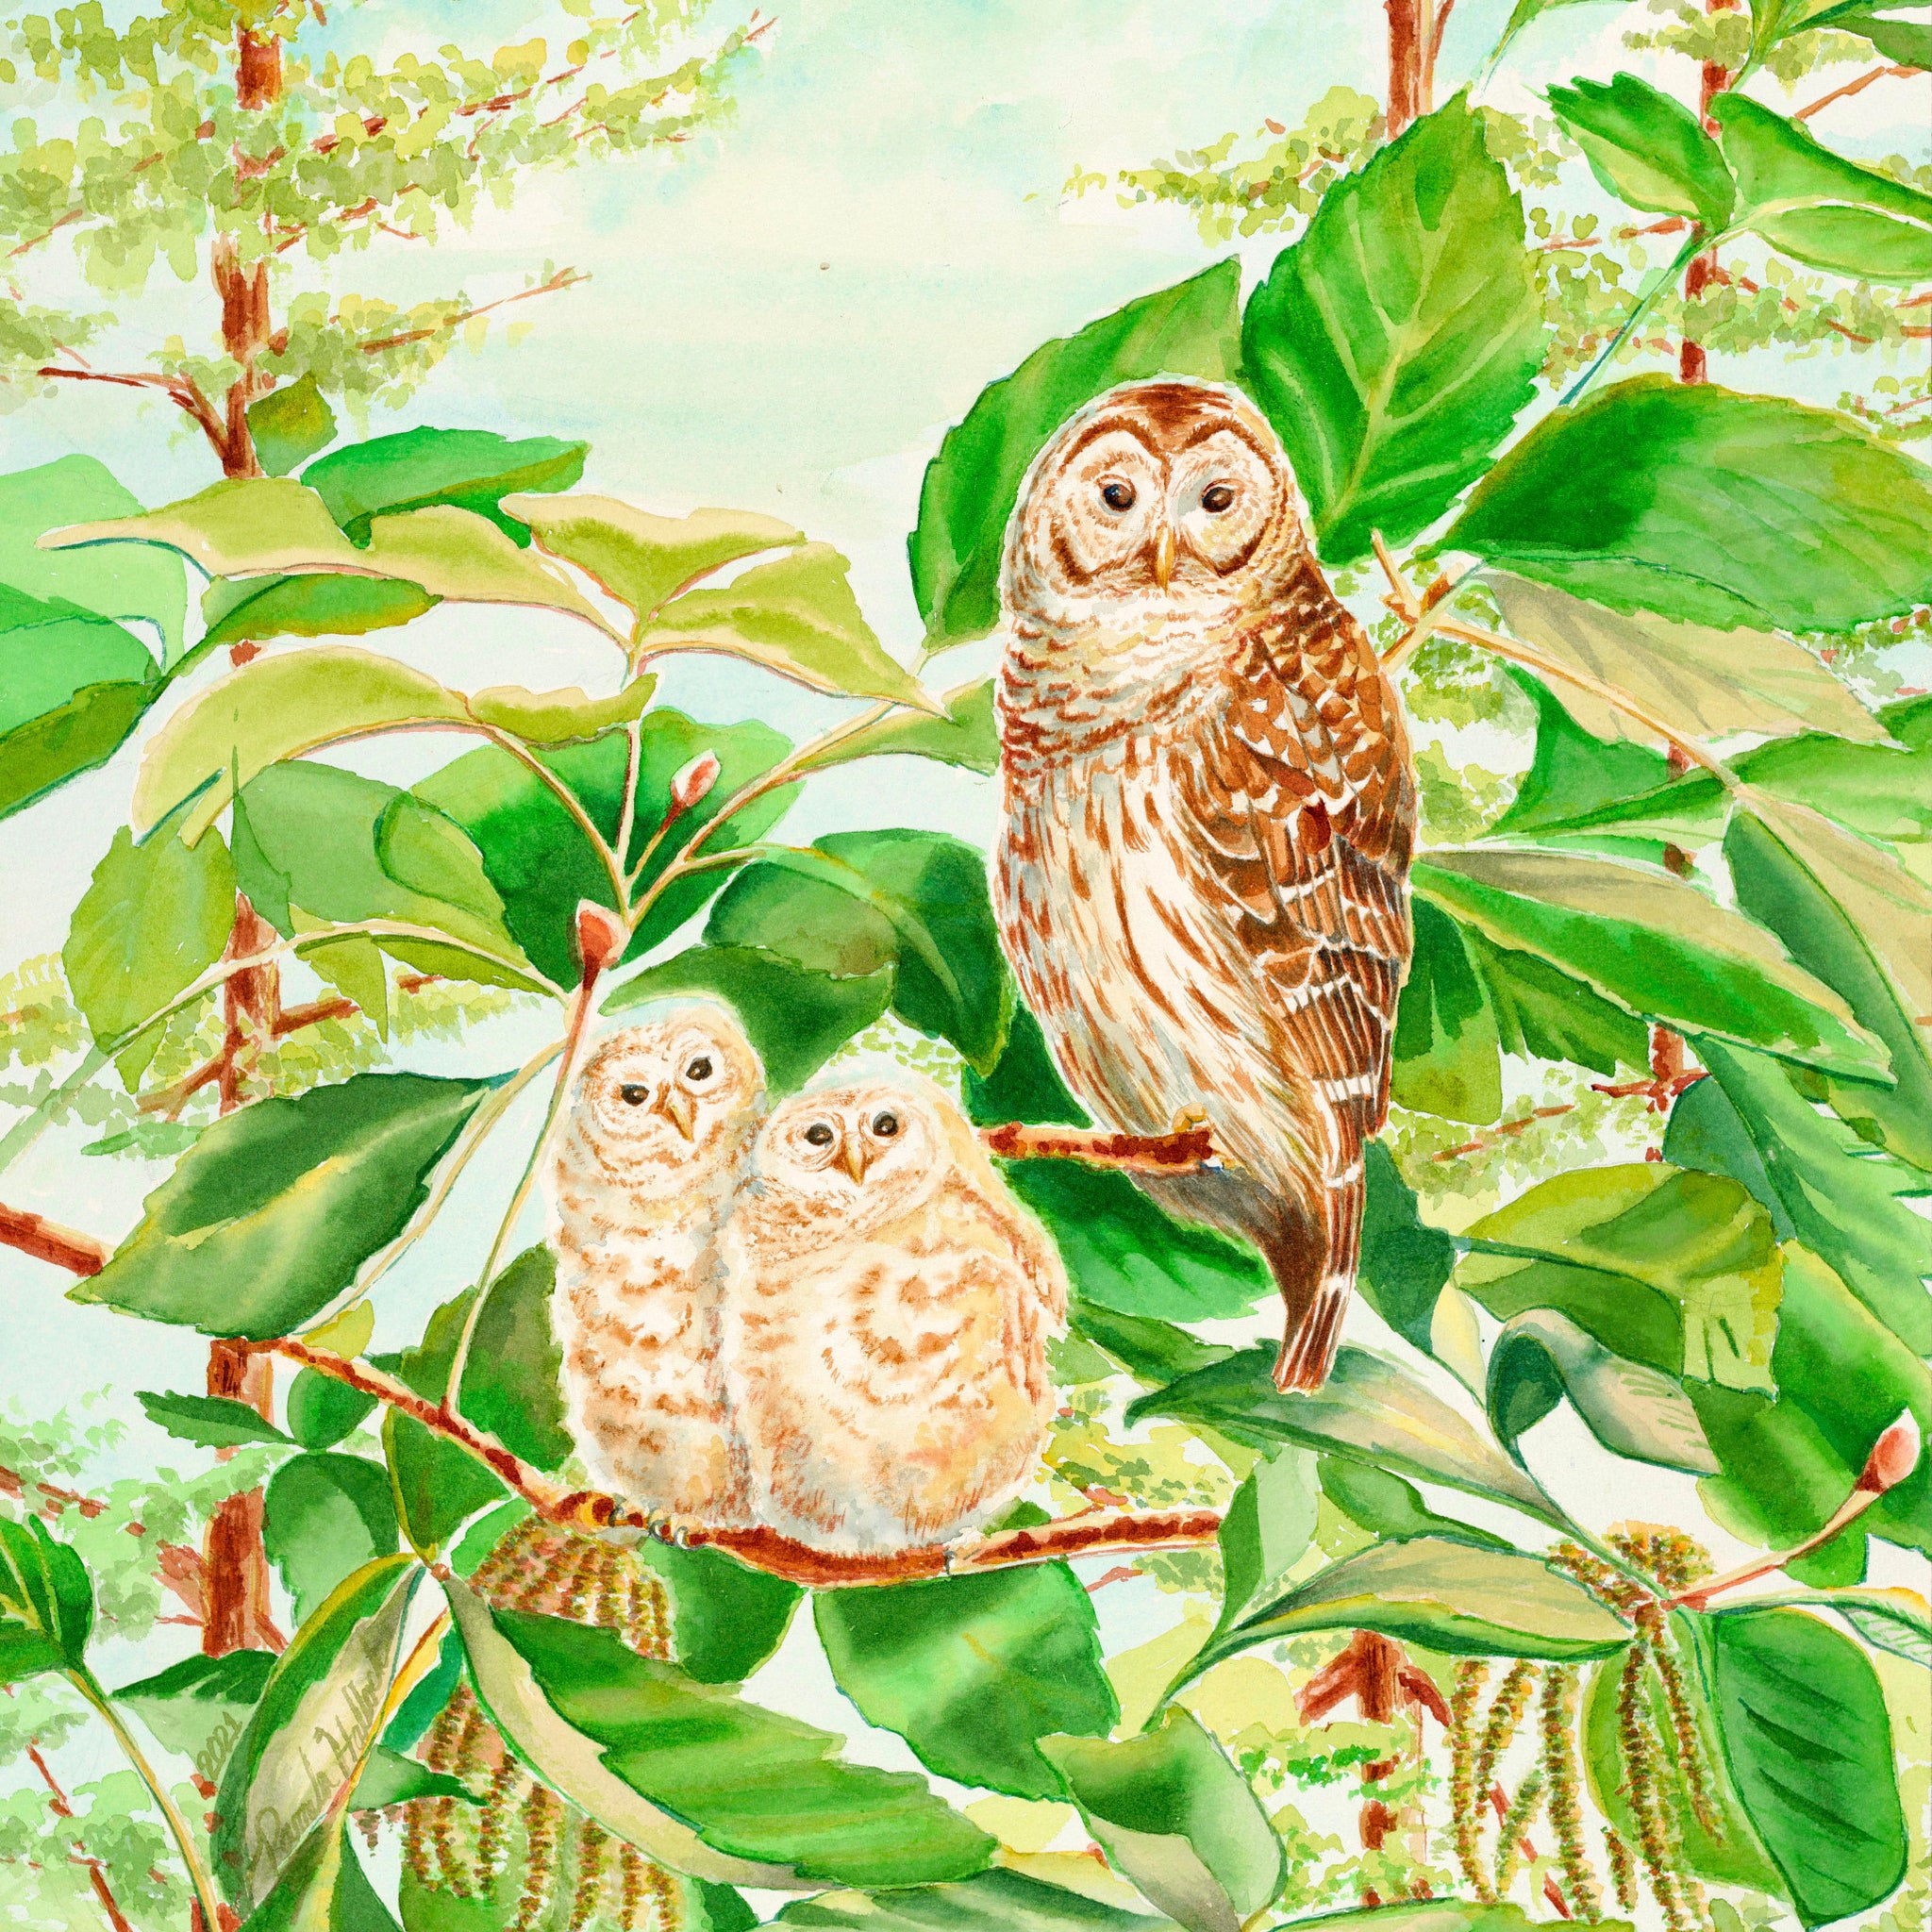 Barred Owl and Owlets, Watercolor Print